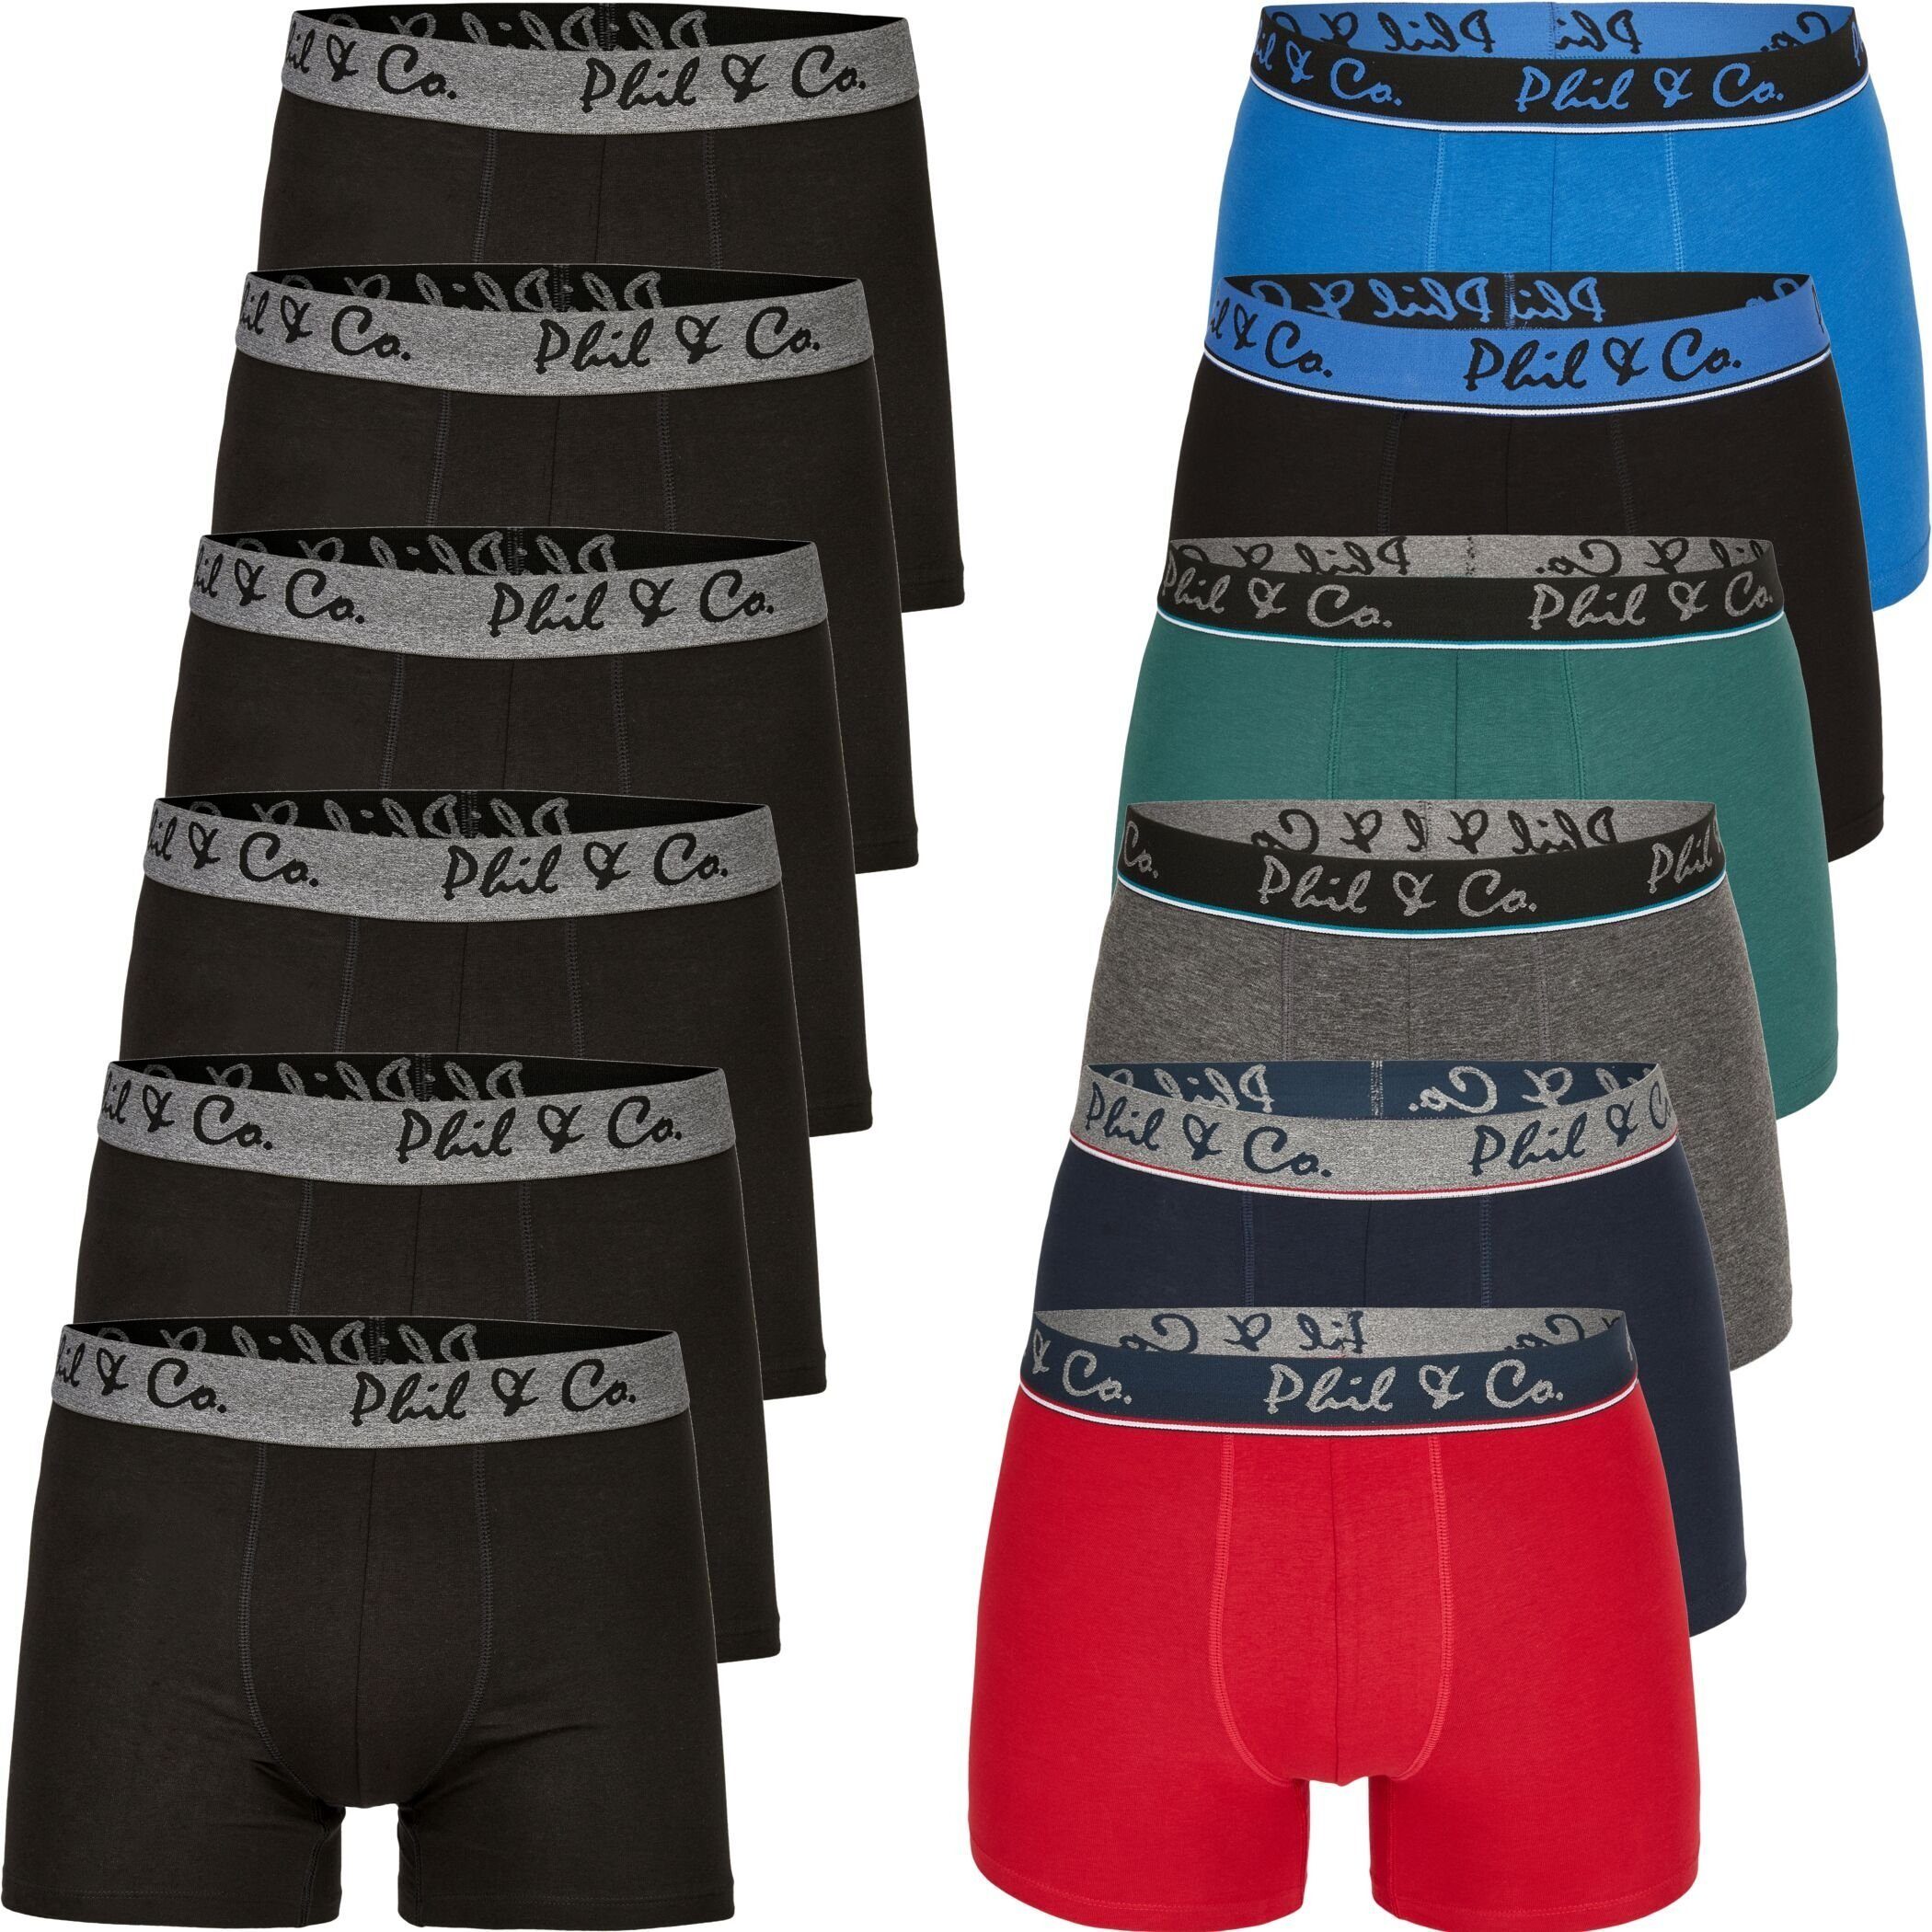 Phil & Co. Boxershorts 12 Pack Phil & Co Berlin Jersey Boxershorts Trunk Short Pant FARBWAHL (1-St) DESIGN 04